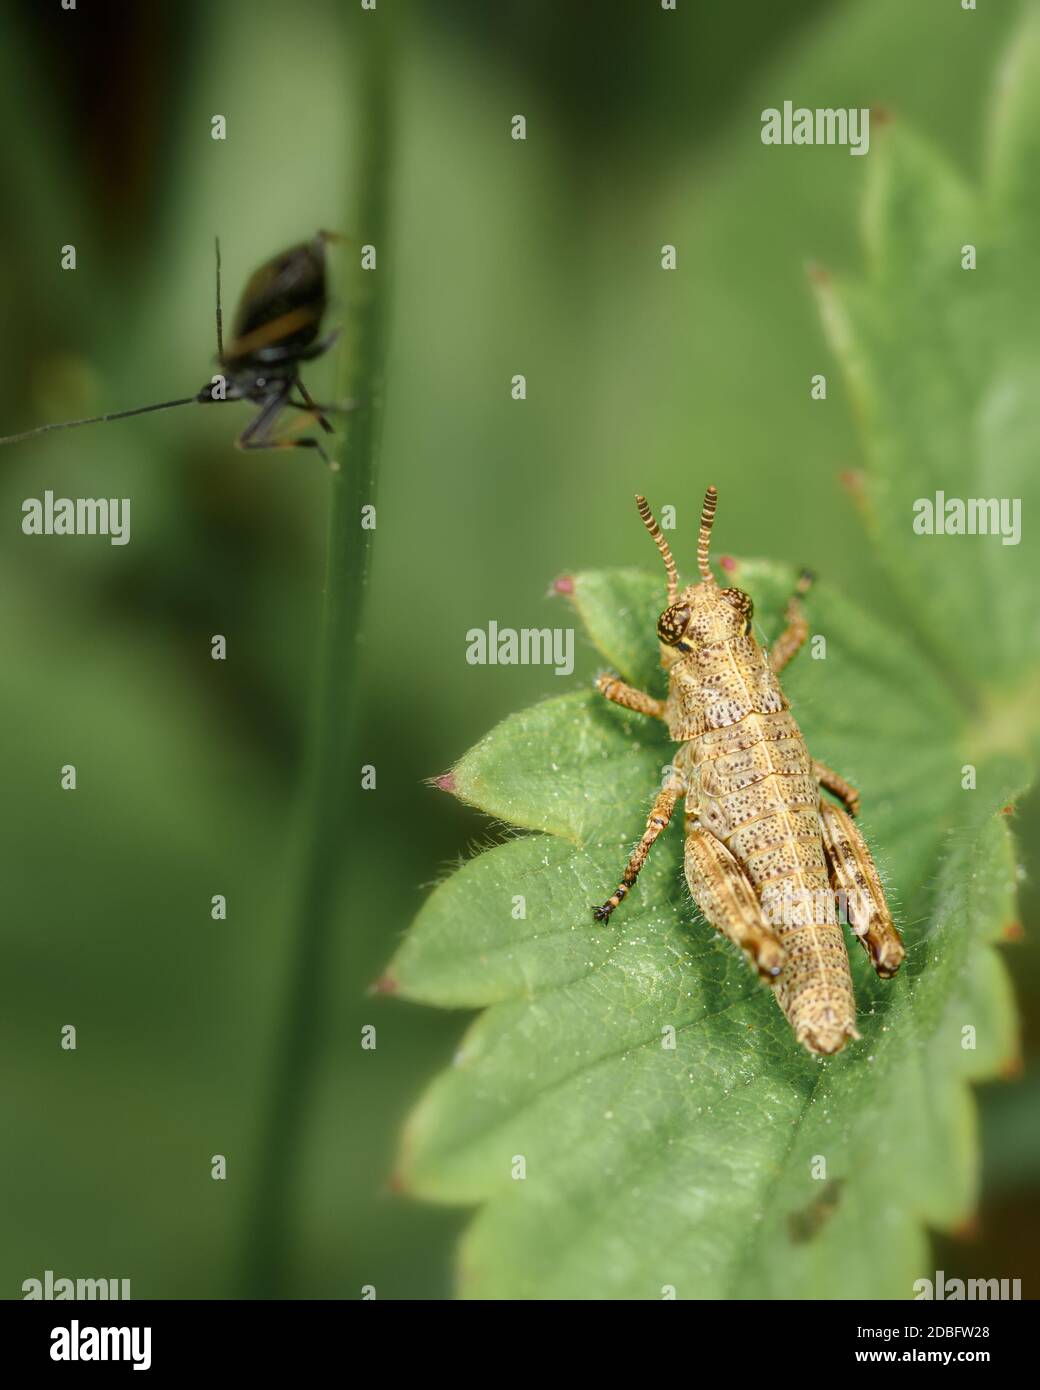 flightless grasshopper-filly wingless, sitting on a green leaf, close-up Stock Photo